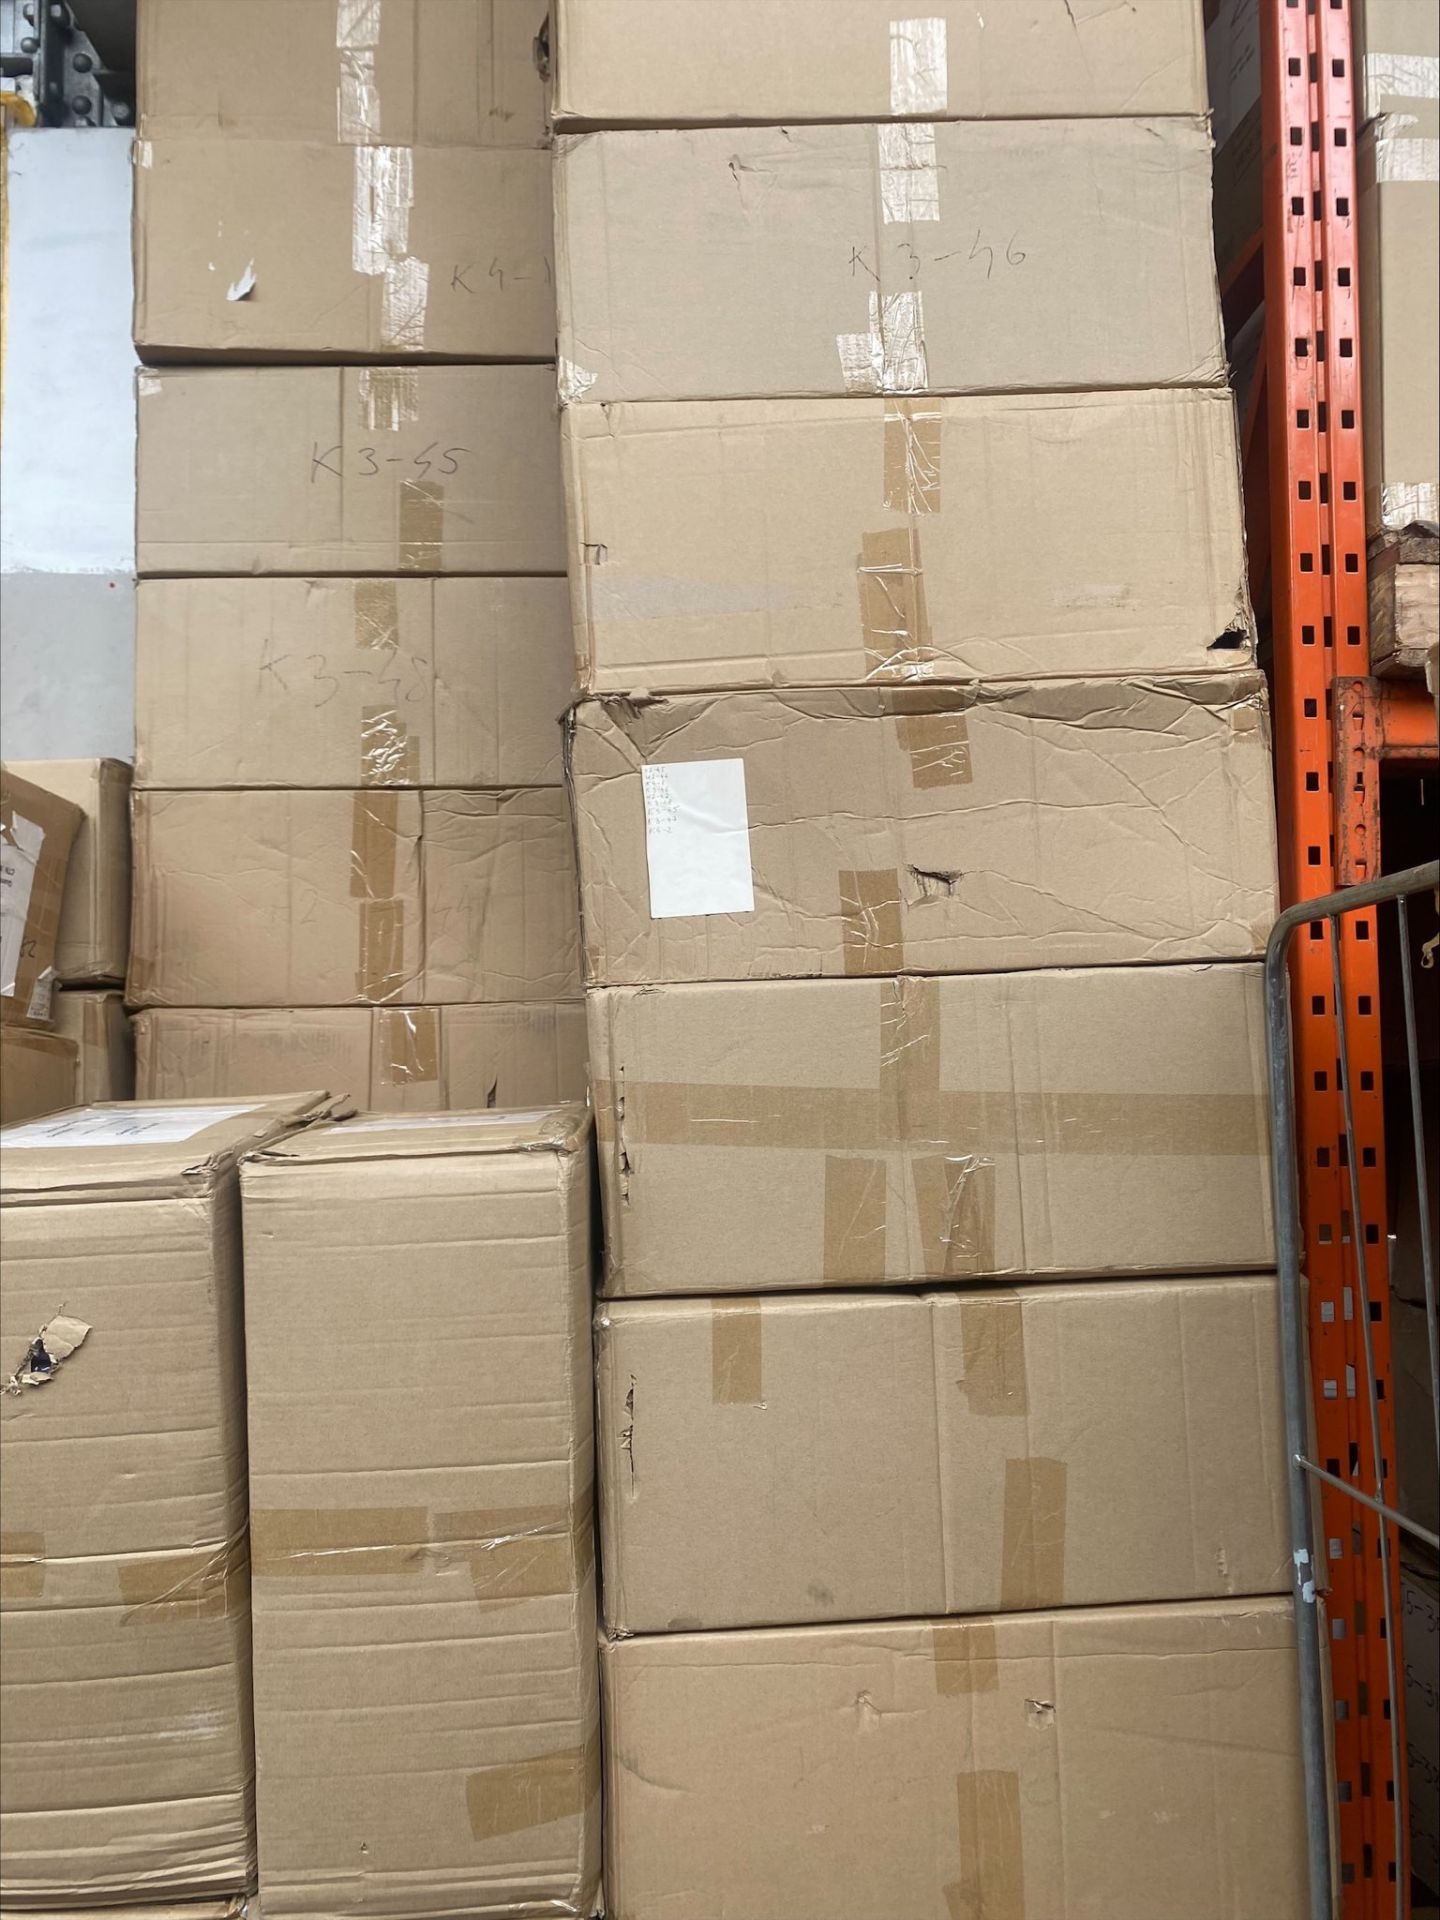 Pallet of New iPhone, Samsung, Airpod, Apple Watch, Charging Cables, Cases, Covers & Accessories - Image 12 of 14